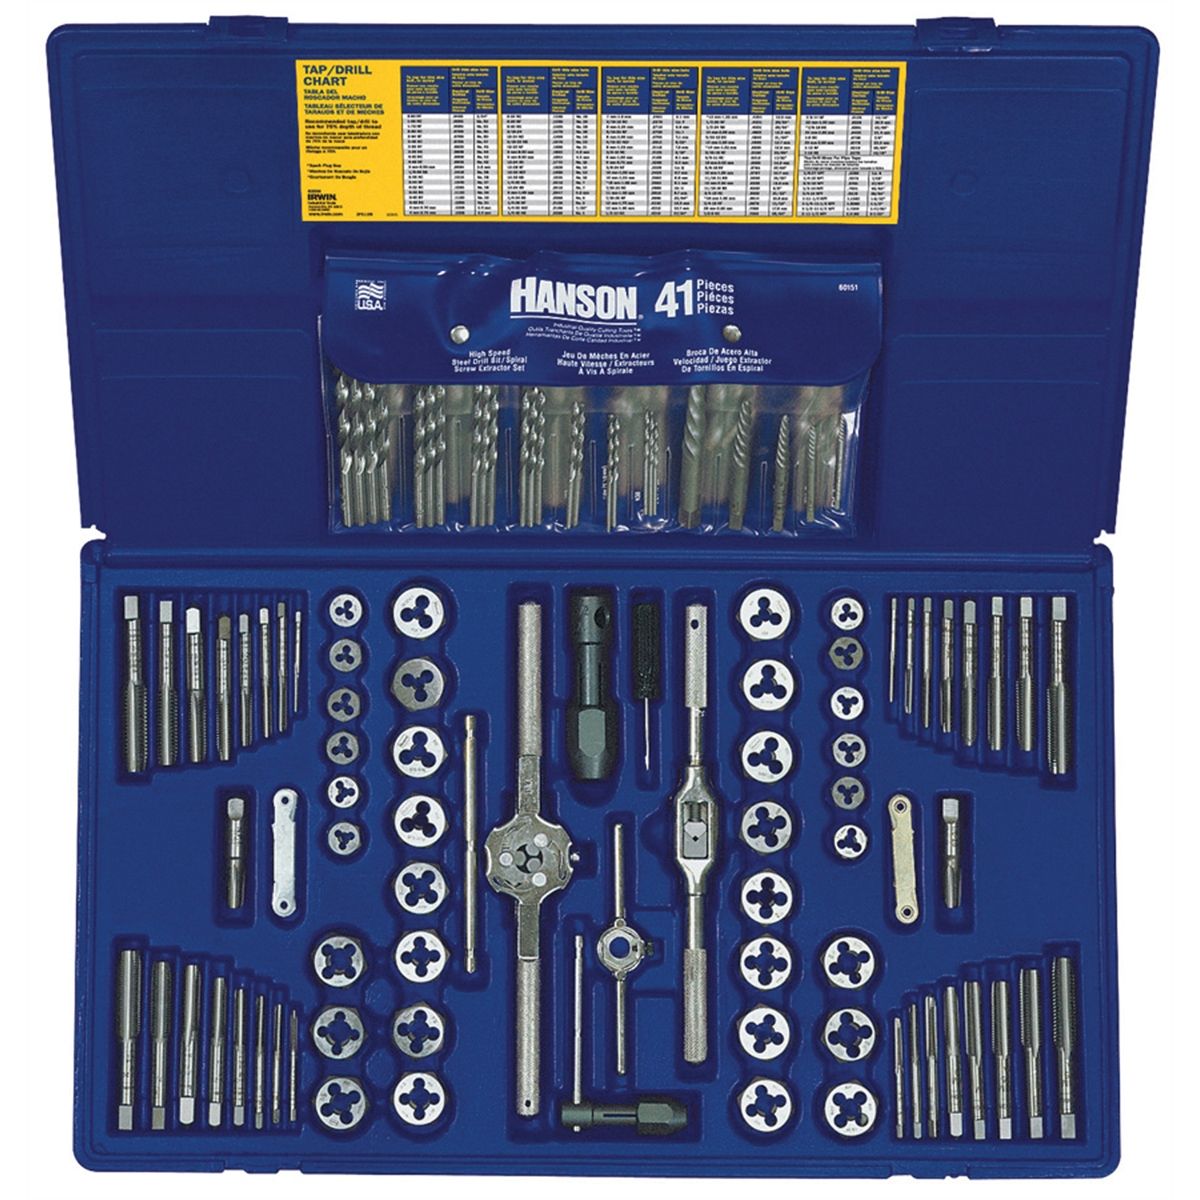 9 Pieces Mini HSS Metric Taps Dies Wrench Handle Tap and Die Set 